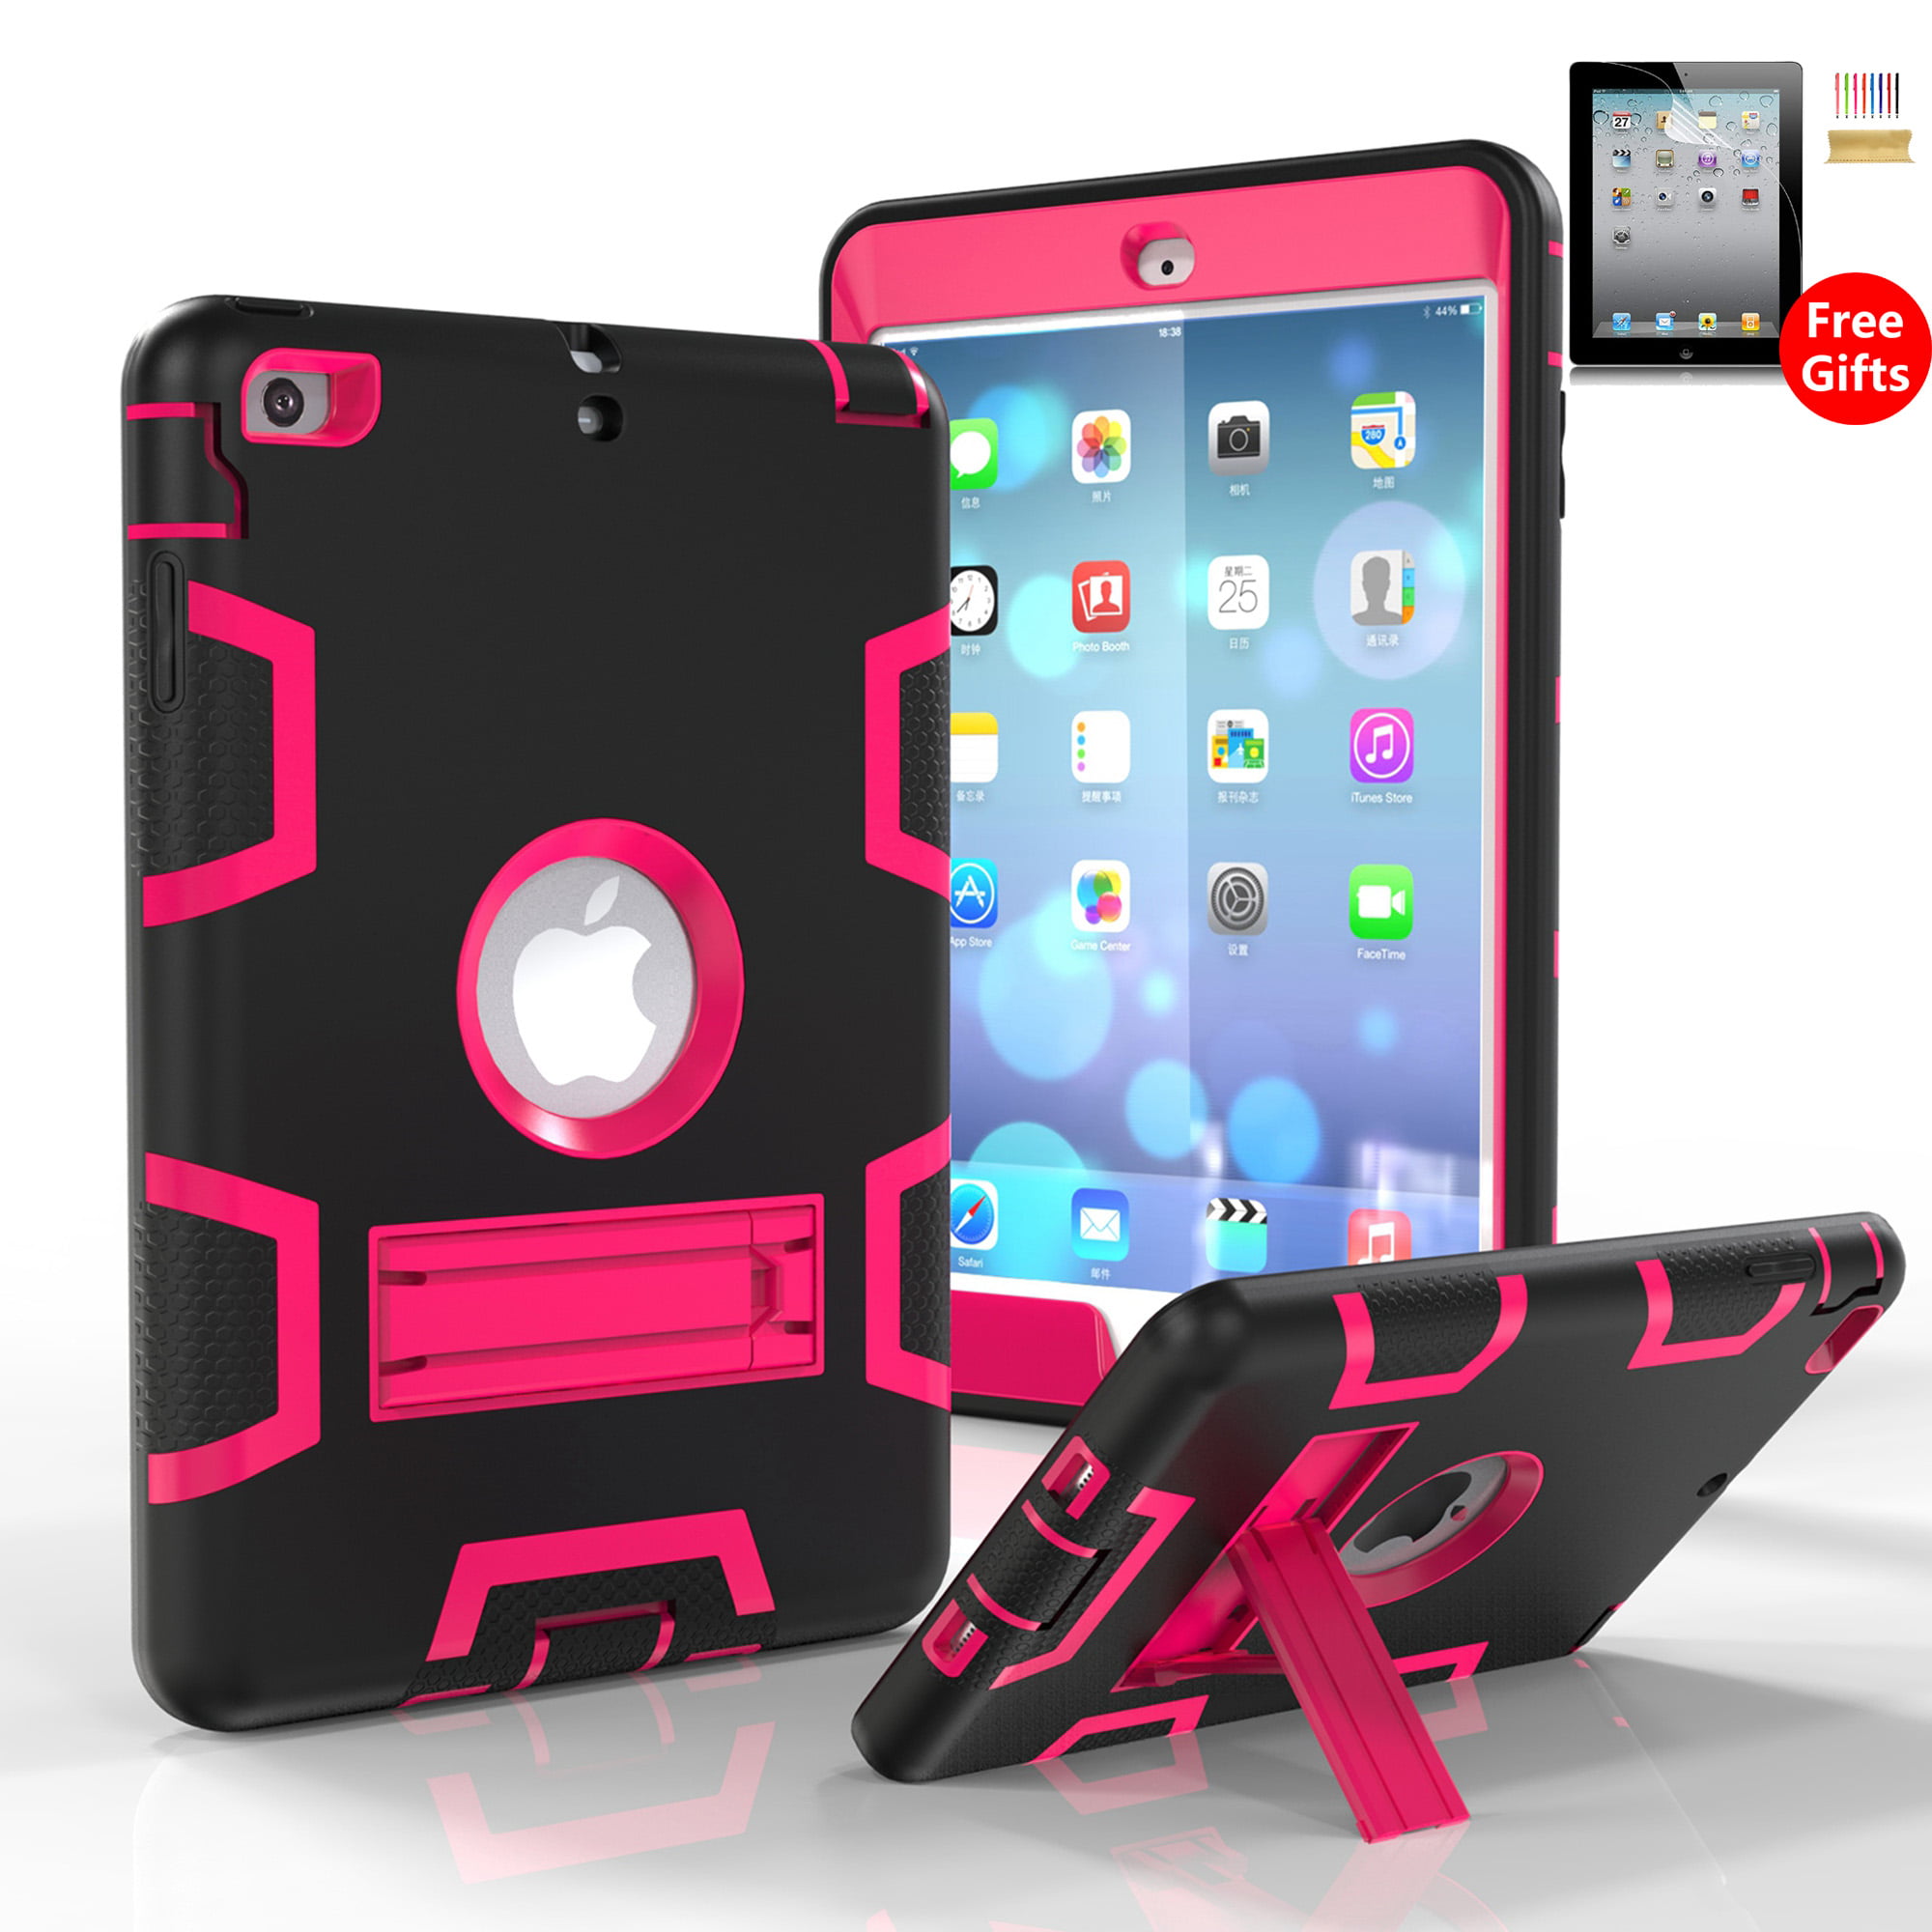 Ipad Mini 1 2 3 Case For Kids Dteck Shockproof Three Layer Protective